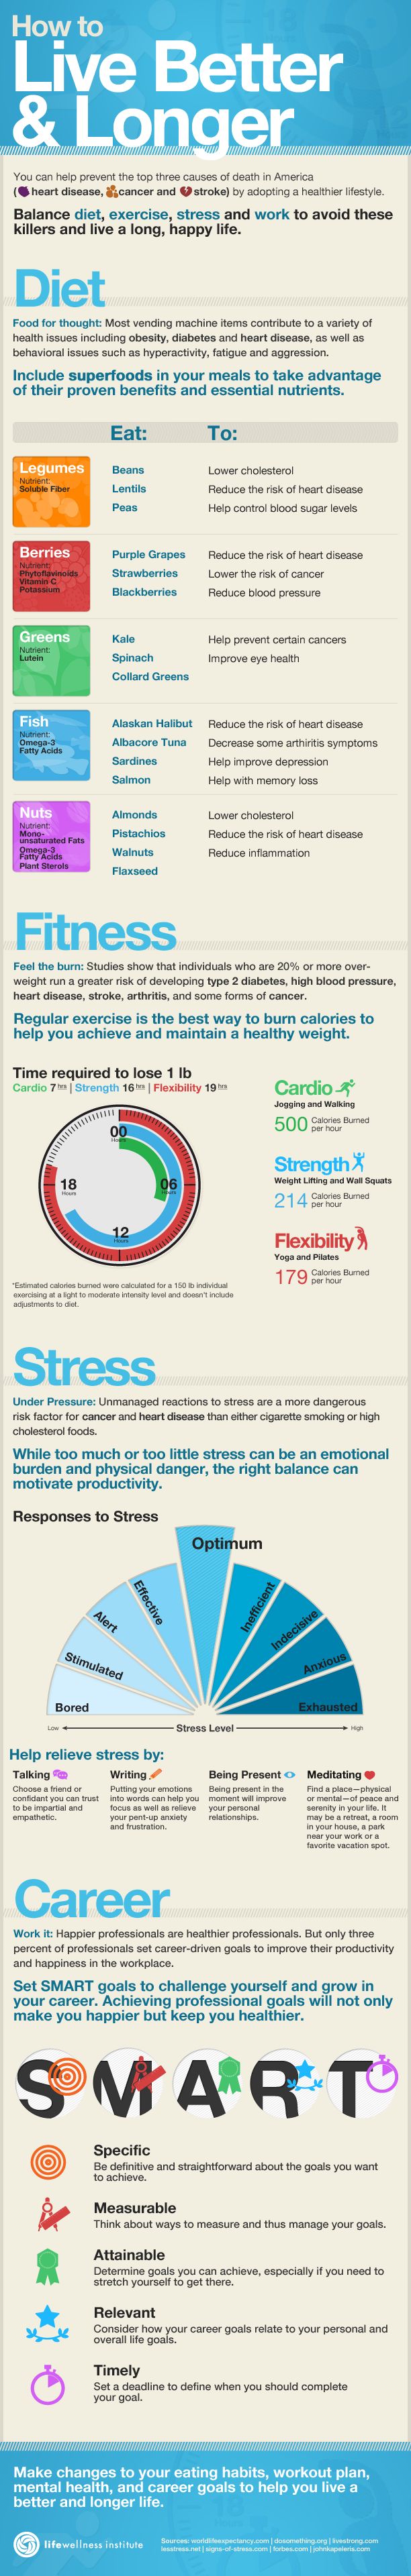 How to Live Stronger, Longer, and Better - Infographic